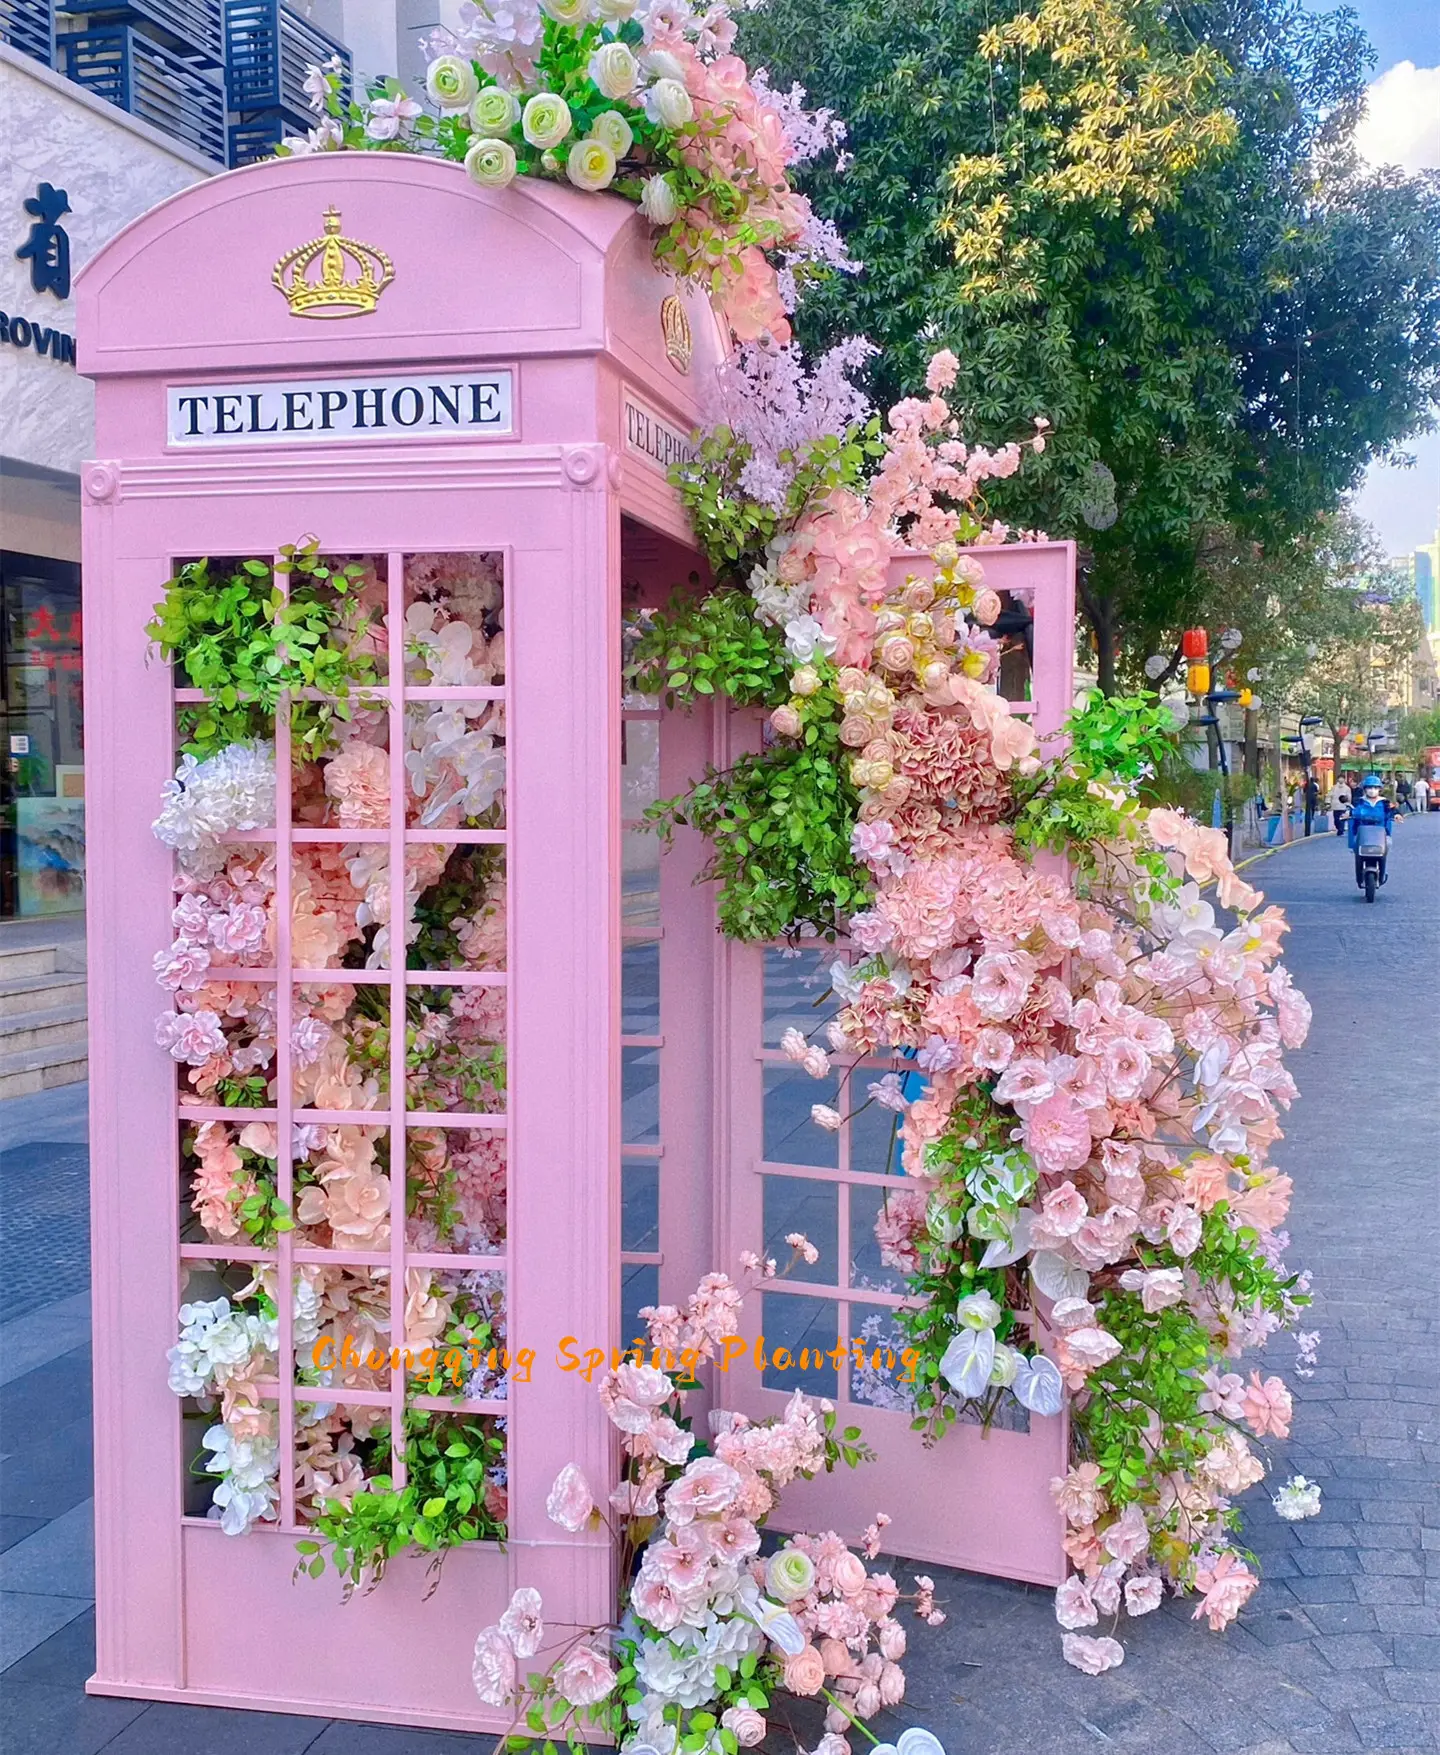 London Telephone Booths Retro Wedding Decoration With Artificial Flowers Pink London Telephone Booth